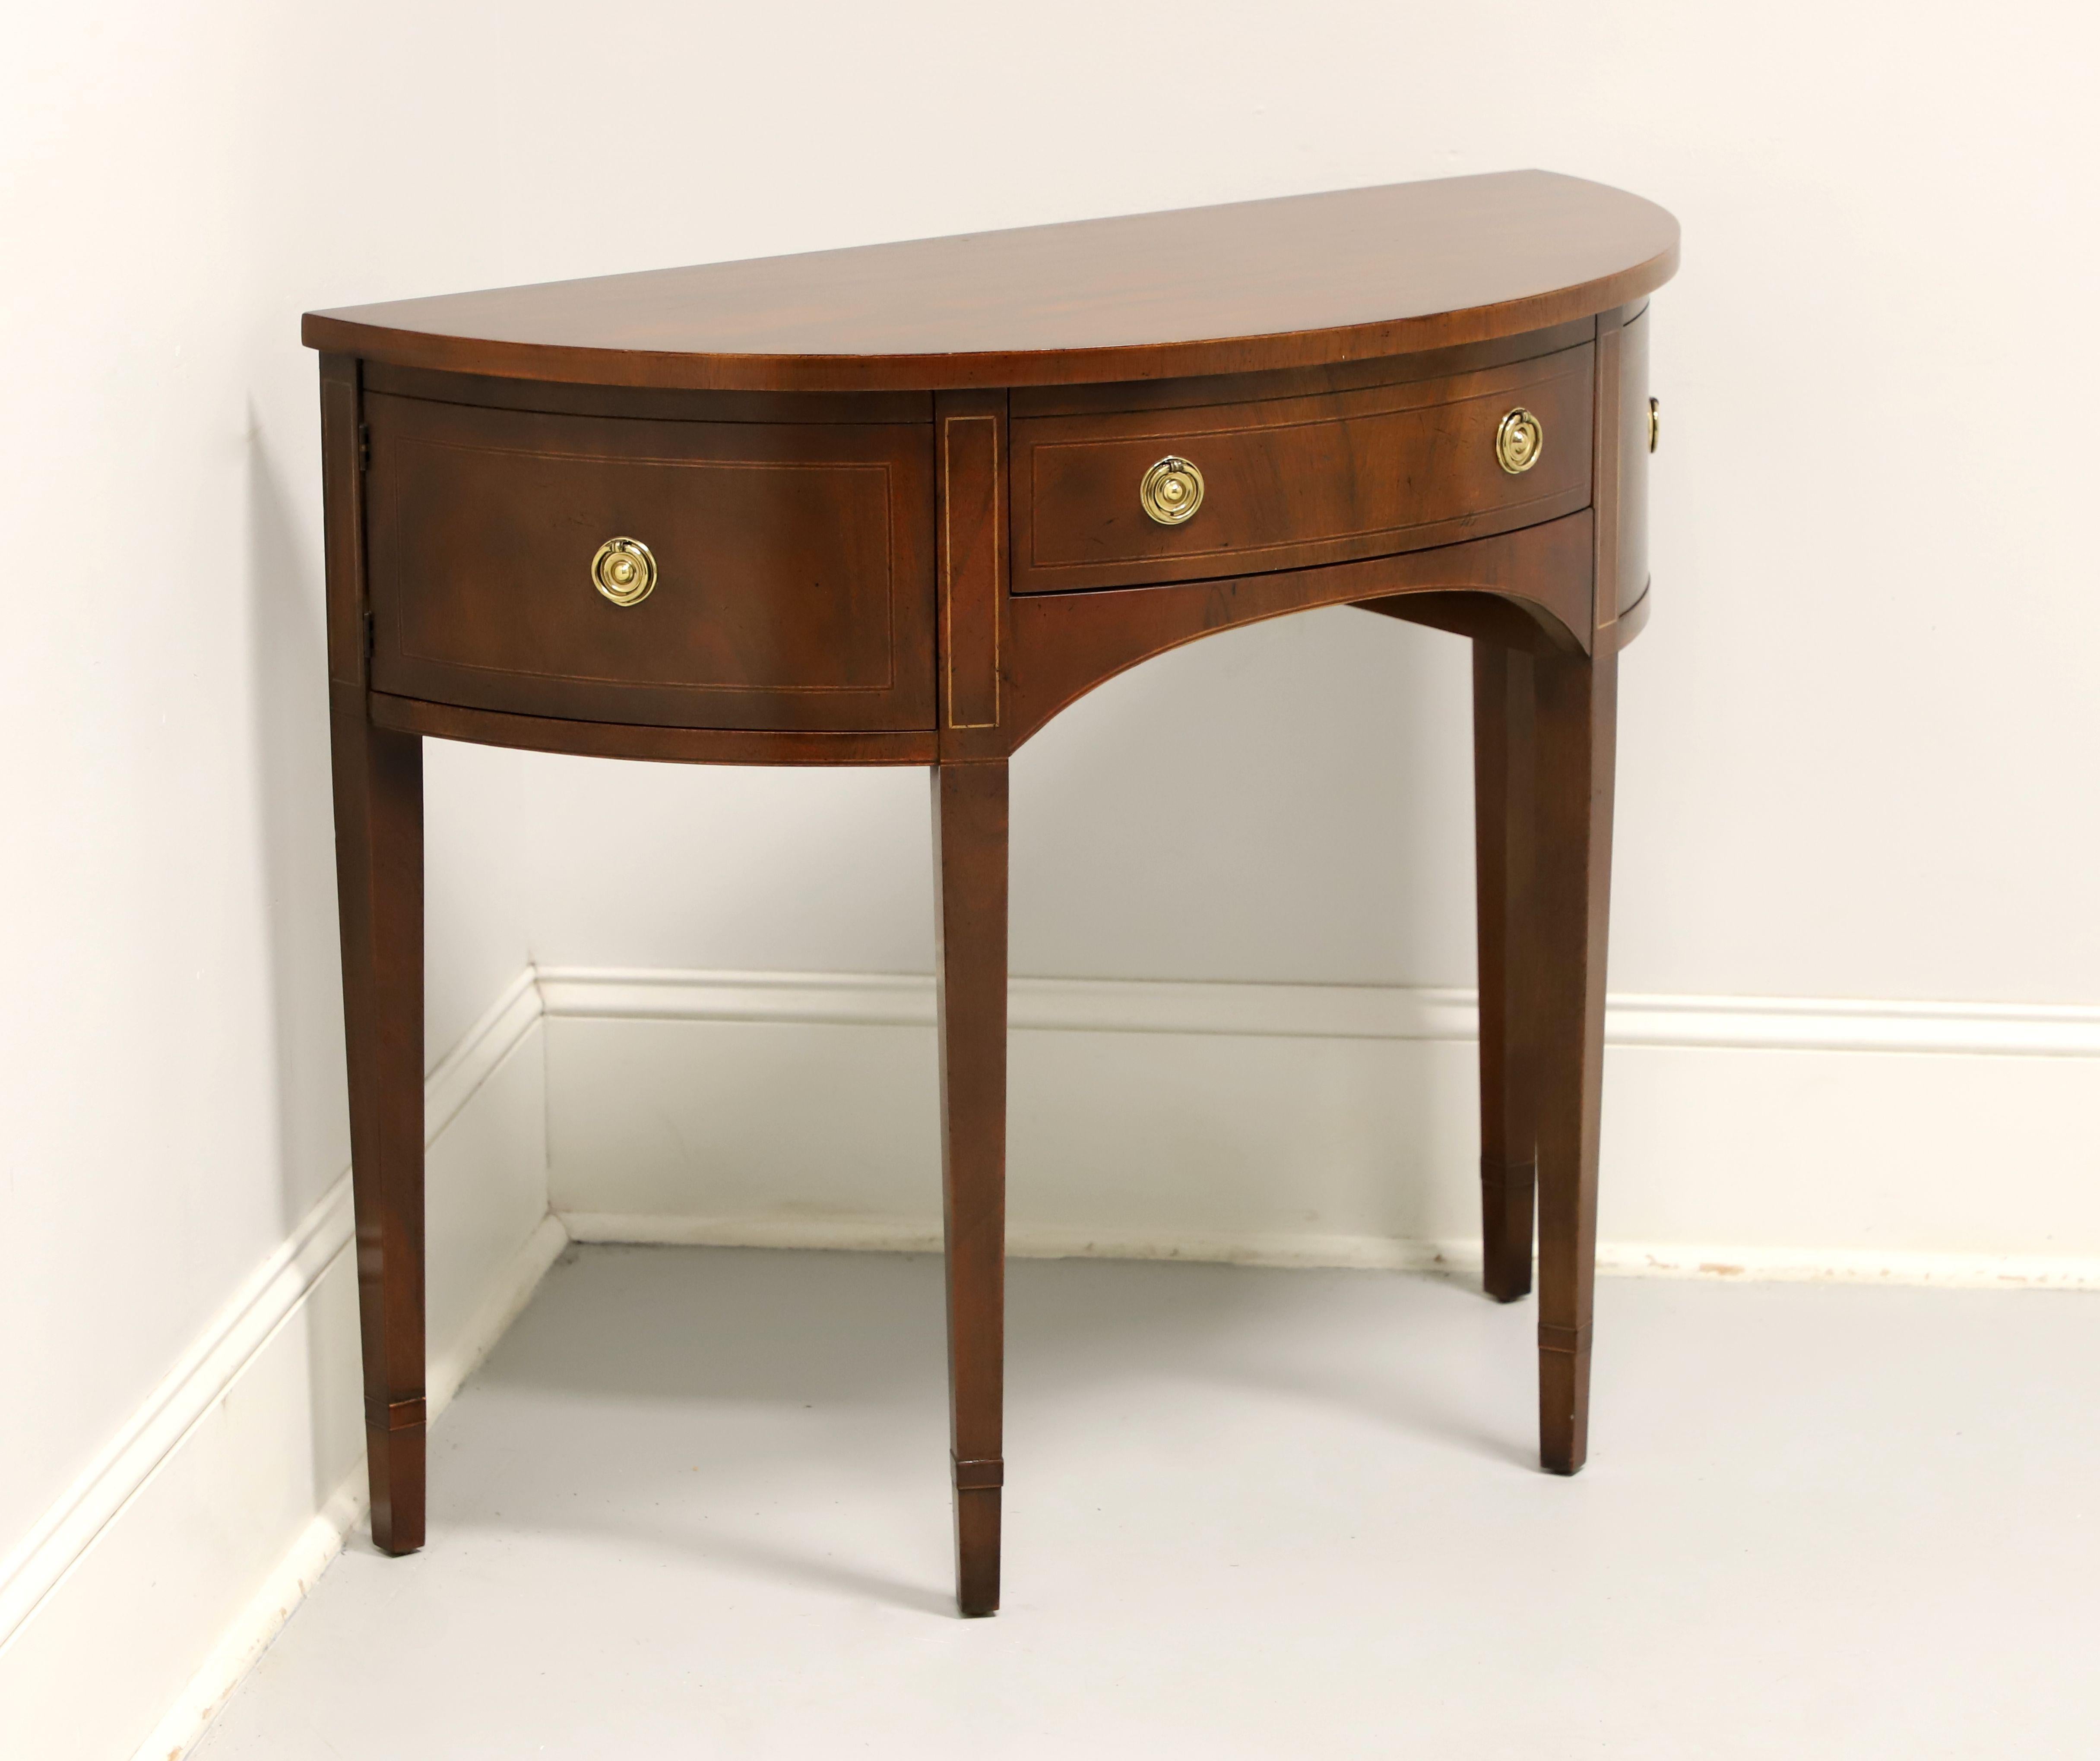 American BAKER Inlaid Mahogany Hepplewhite Demilune Console Table / Server - A